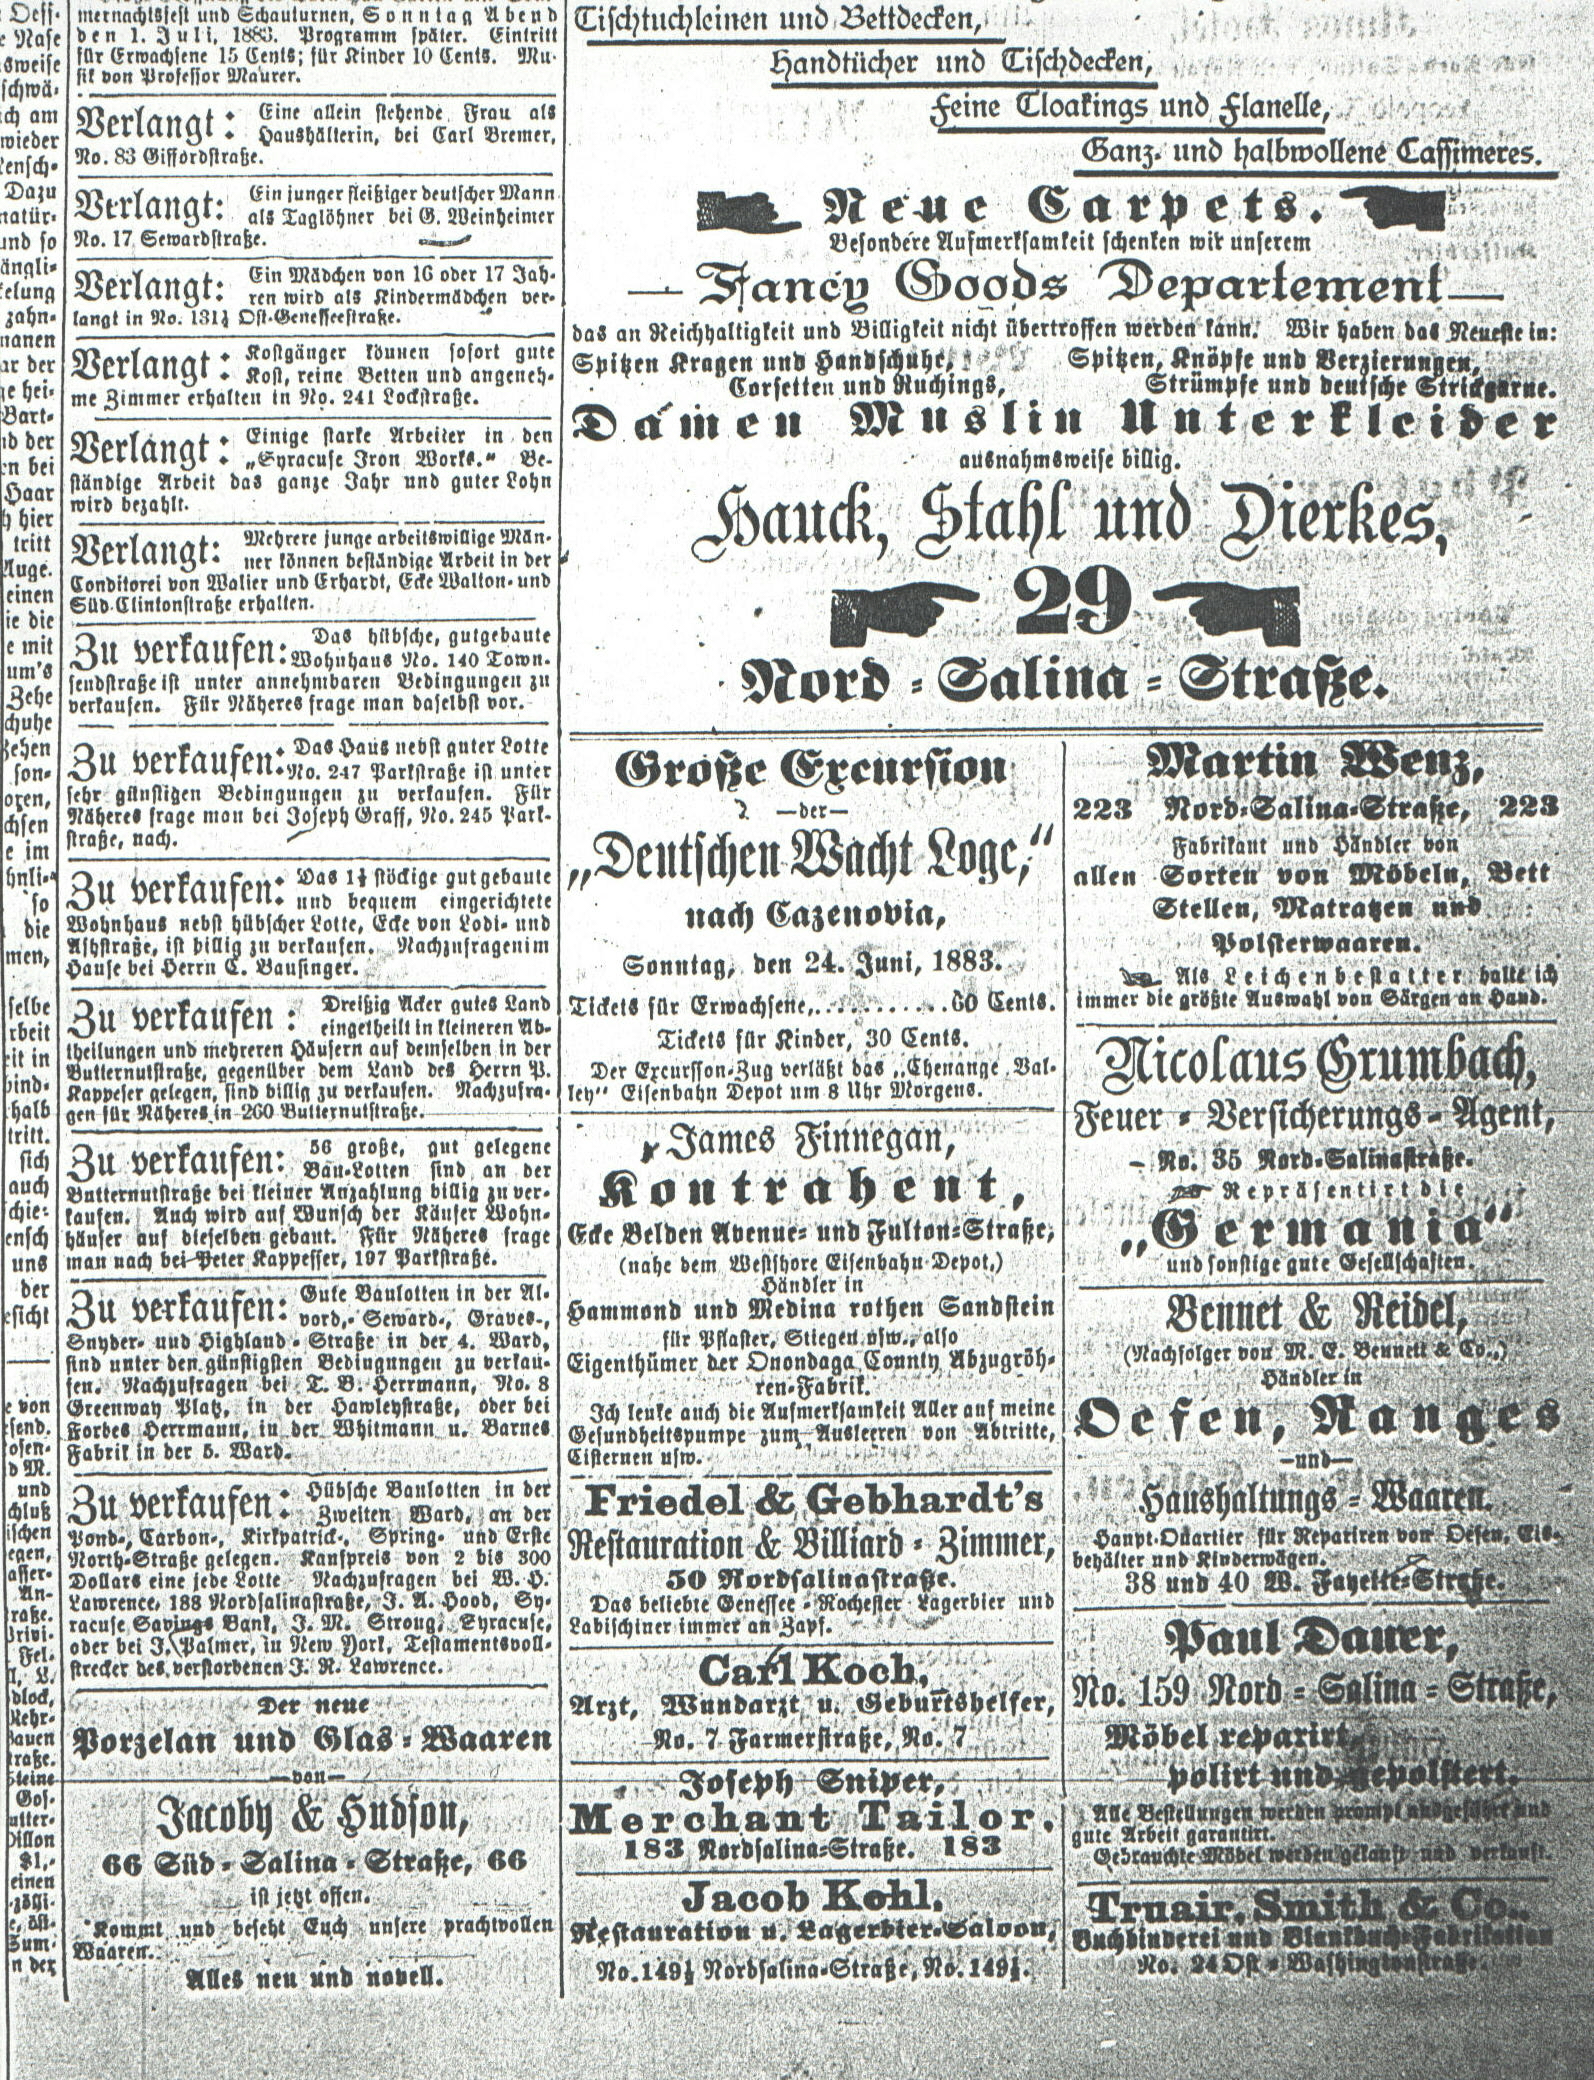 ads from the Syracuse Union, 1883